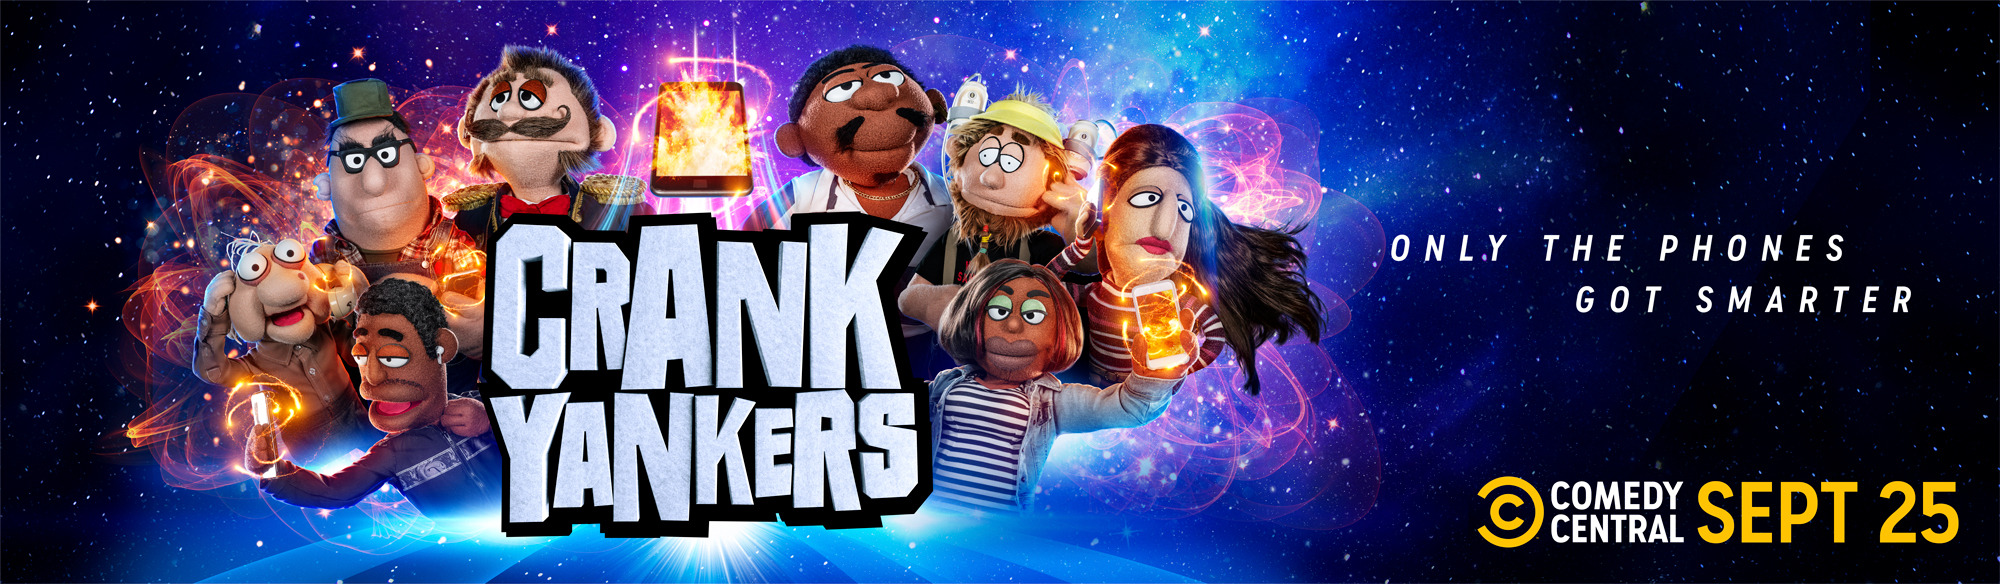 Mega Sized TV Poster Image for Crank Yankers (#2 of 2)